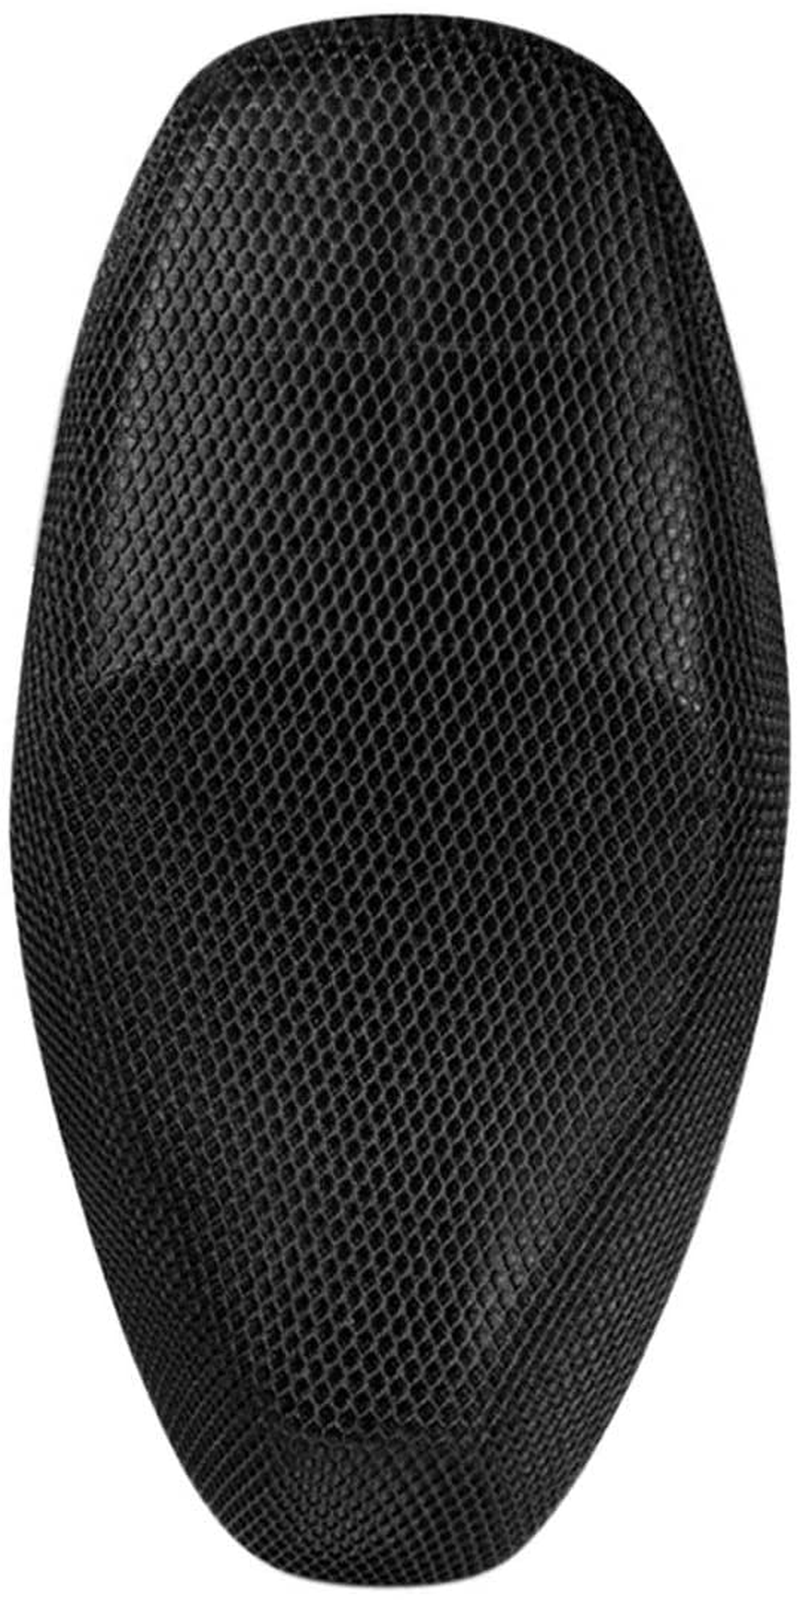 AUTUT Black Motorcycle Scooter Moped Seat Cover Seat Anti-Slip Cushion 3D Spacer Mesh Fabric, XX-Large Vehicles & Parts > Vehicle Parts & Accessories > Vehicle Maintenance, Care & Decor > Vehicle Covers > Vehicle Storage Covers > Motorcycle Storage Covers AUTUT   